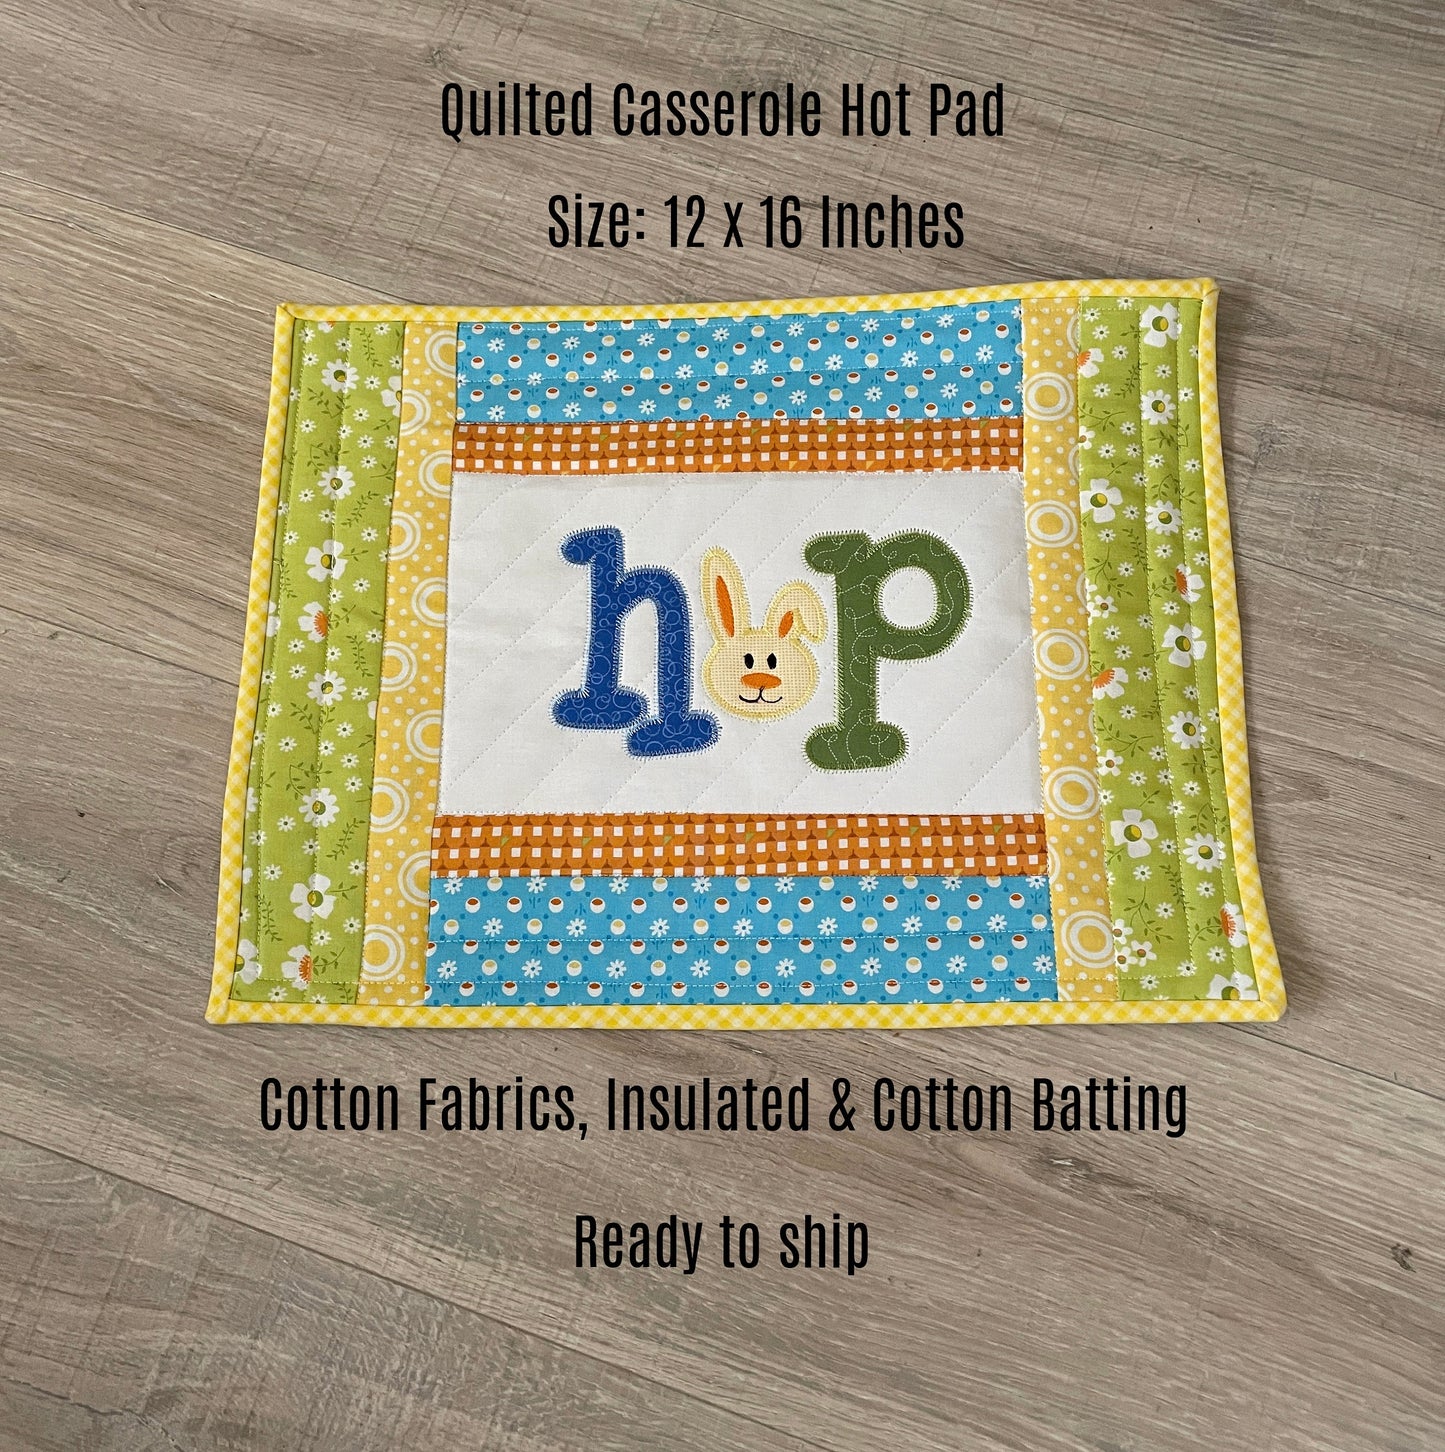 quilted casserole hot pad in green blue and yellow with embroidery design in the center panel